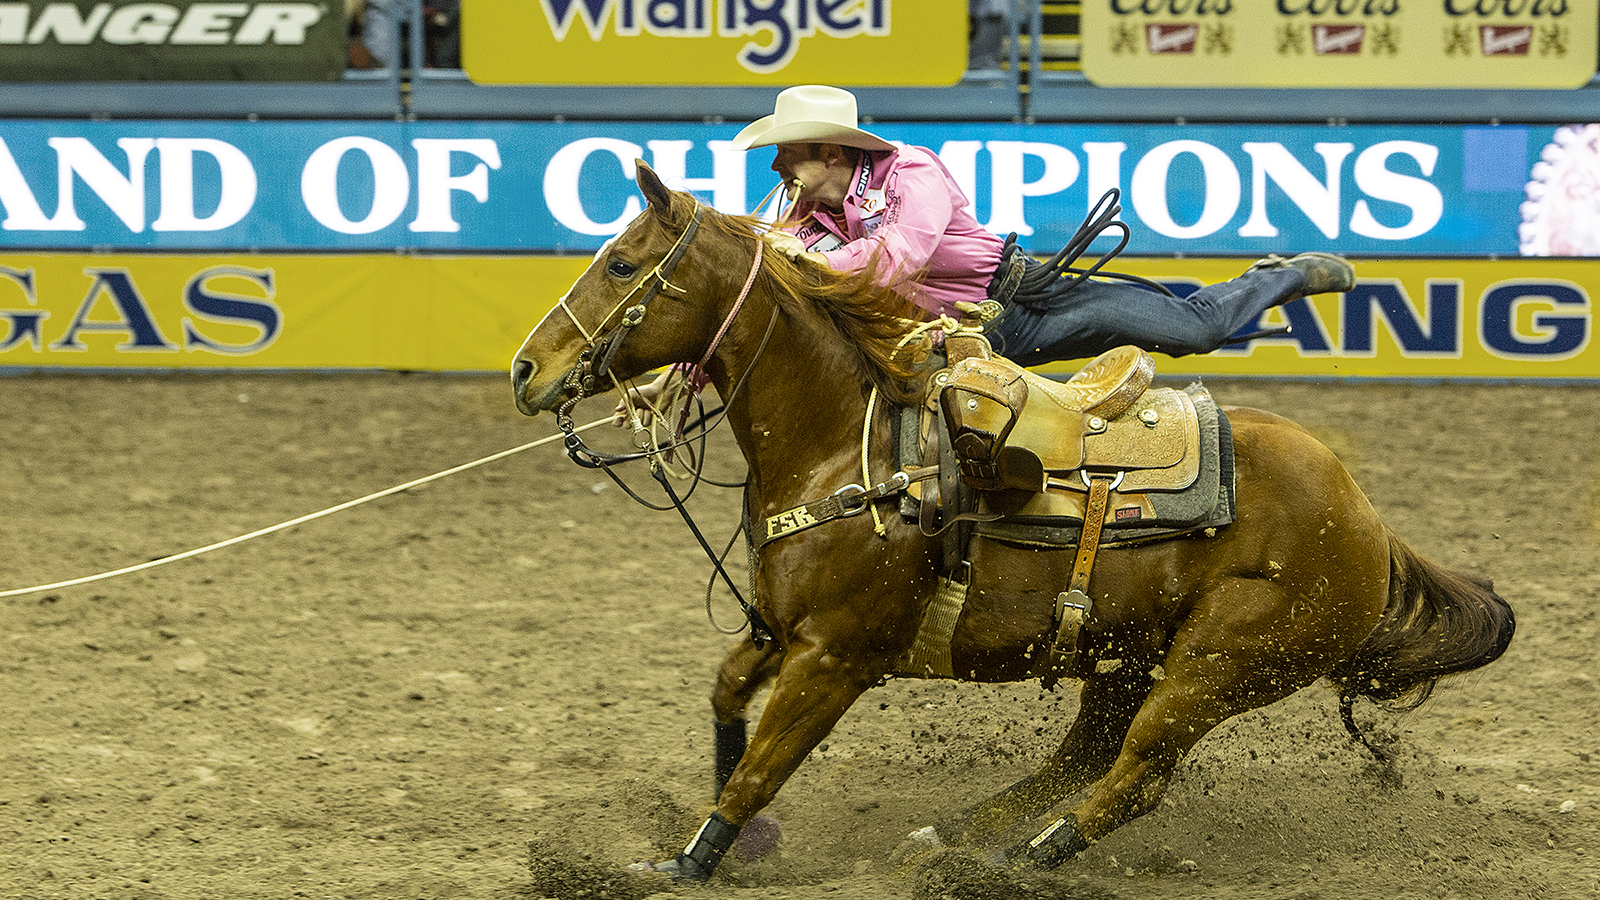 A Tie Down Roper Shares His Winning Edge